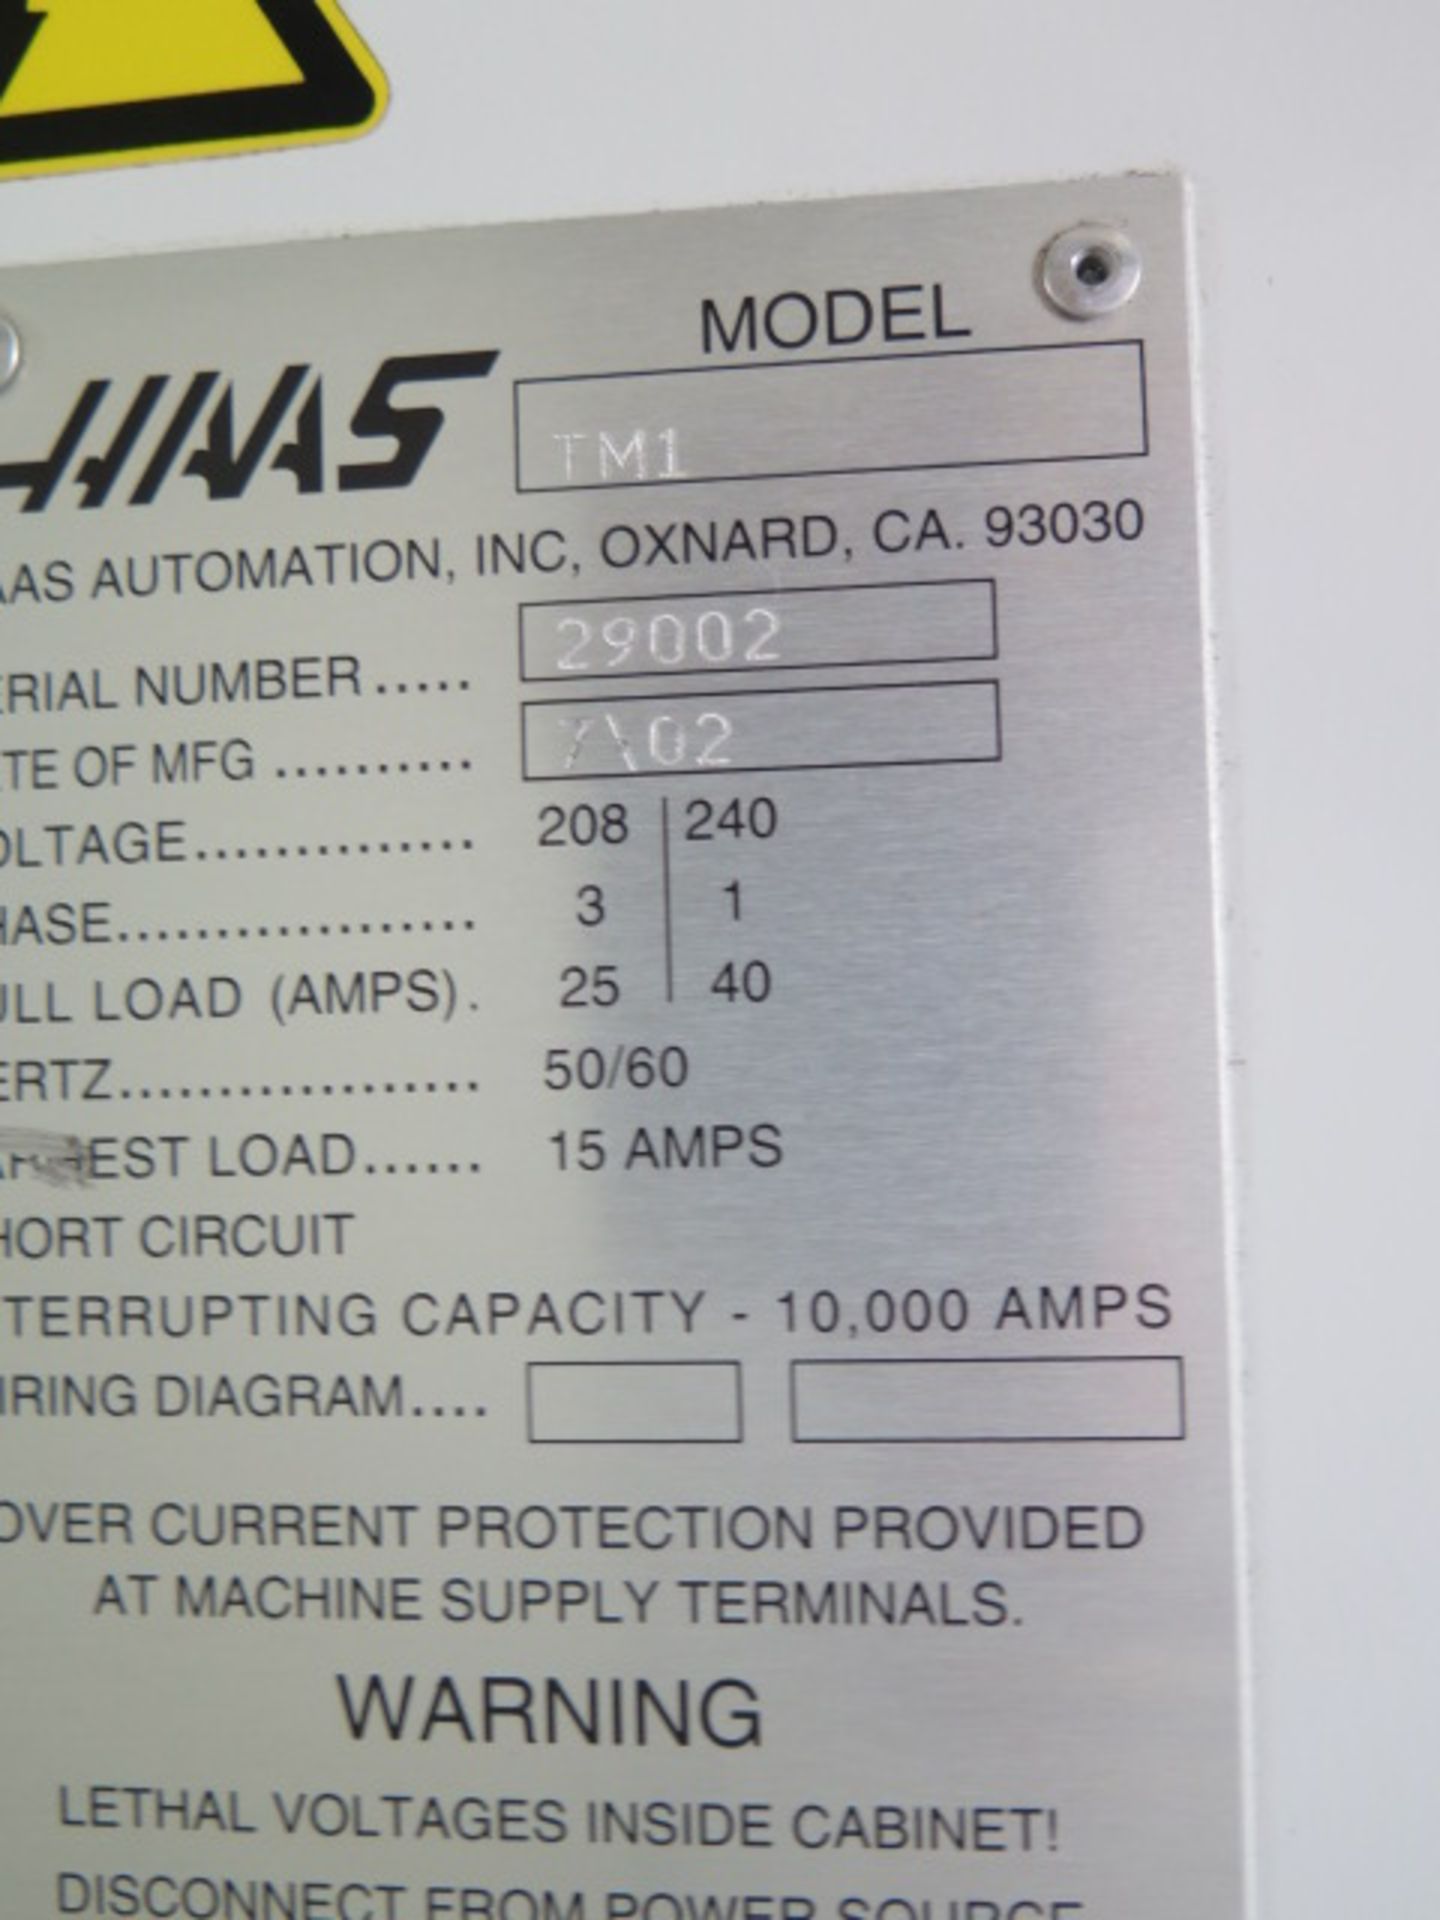 2002 Haas TM-1 CNC Tool Room Mill s/n 29002 w/ 40-Taper Spindle, 10 ½” x 48” Table, Sold AS IS - Image 15 of 15